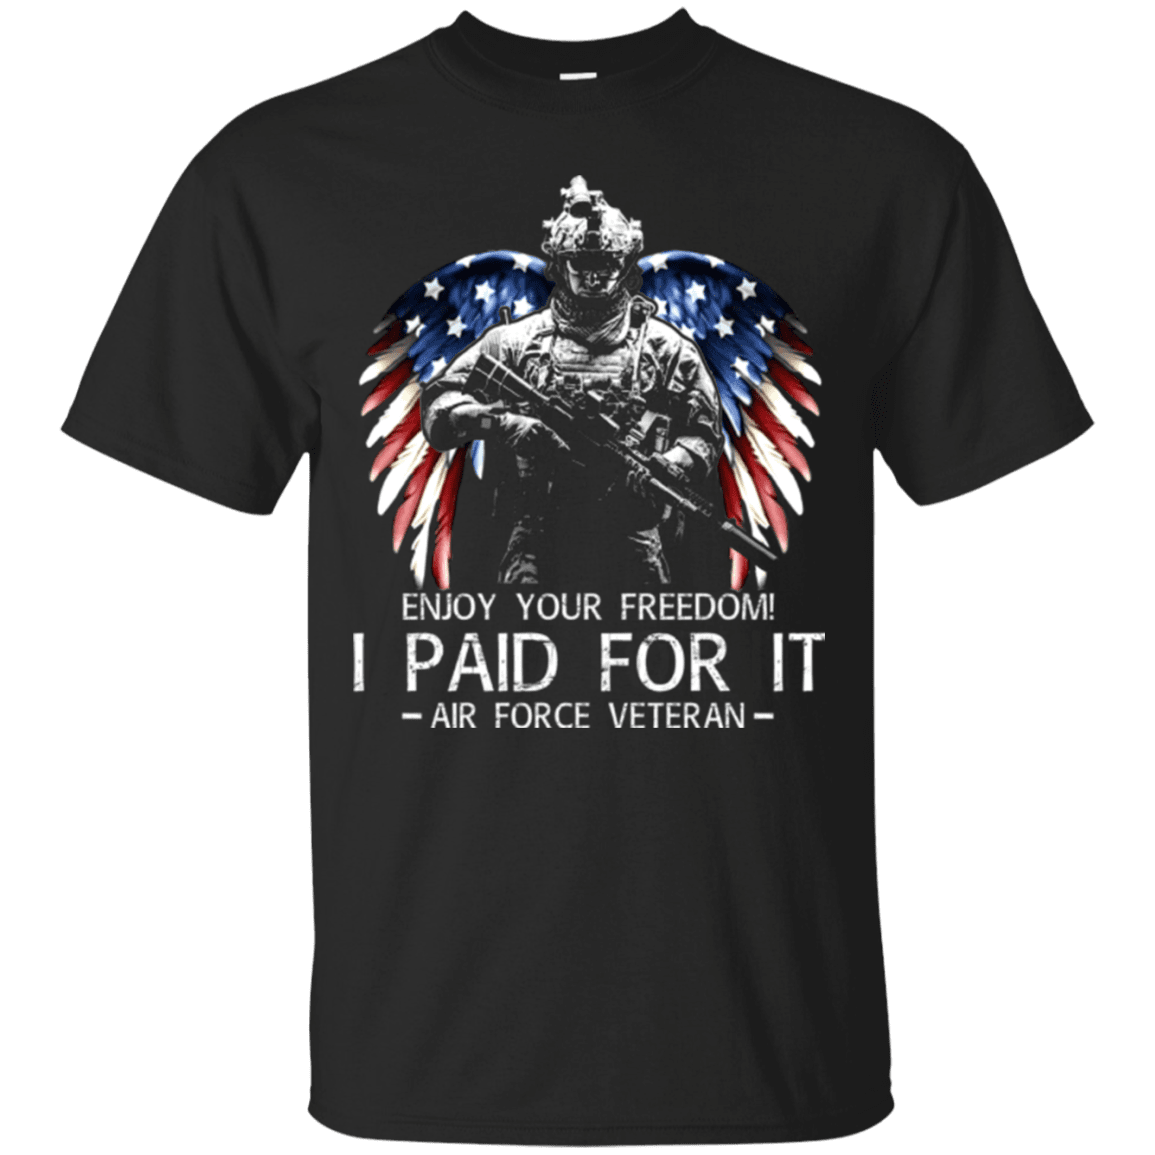 Air Force Veteran – Enjoy your freedom I paid for it Men Front T Shirts